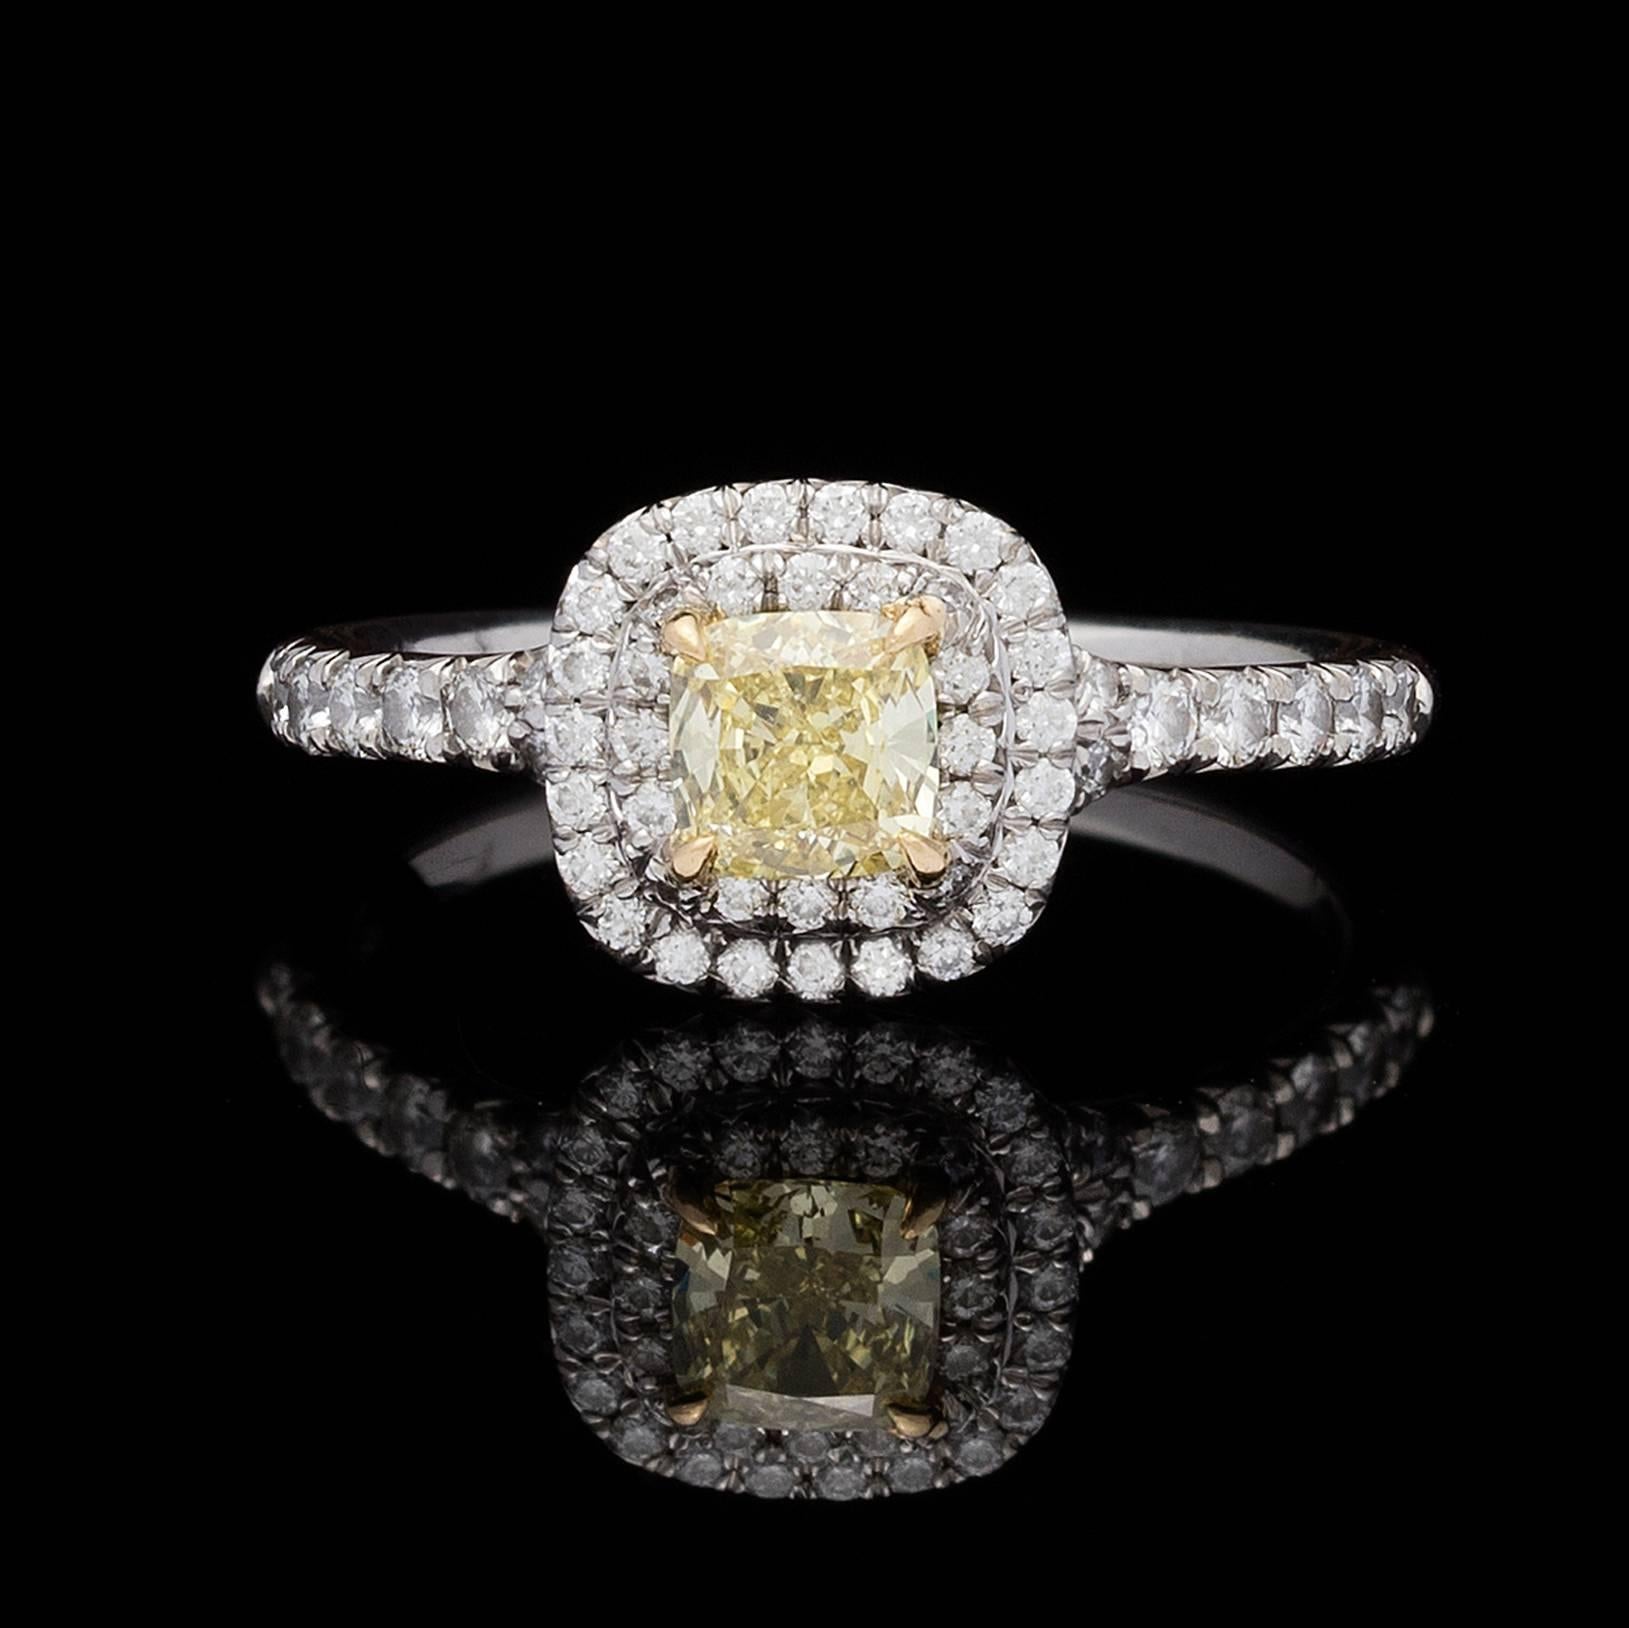 Tiffany & Co Platinum Diamond Ring Features a 0.40 Carat Cushion Cut Fancy Intense Yellow Diamond with a Double Halo of 0.40 ctw. Round Brilliant Cut Diamonds.  The ring is currently a 5.0 and can be sized up or down.  Total weight is 3.6 grams.  A